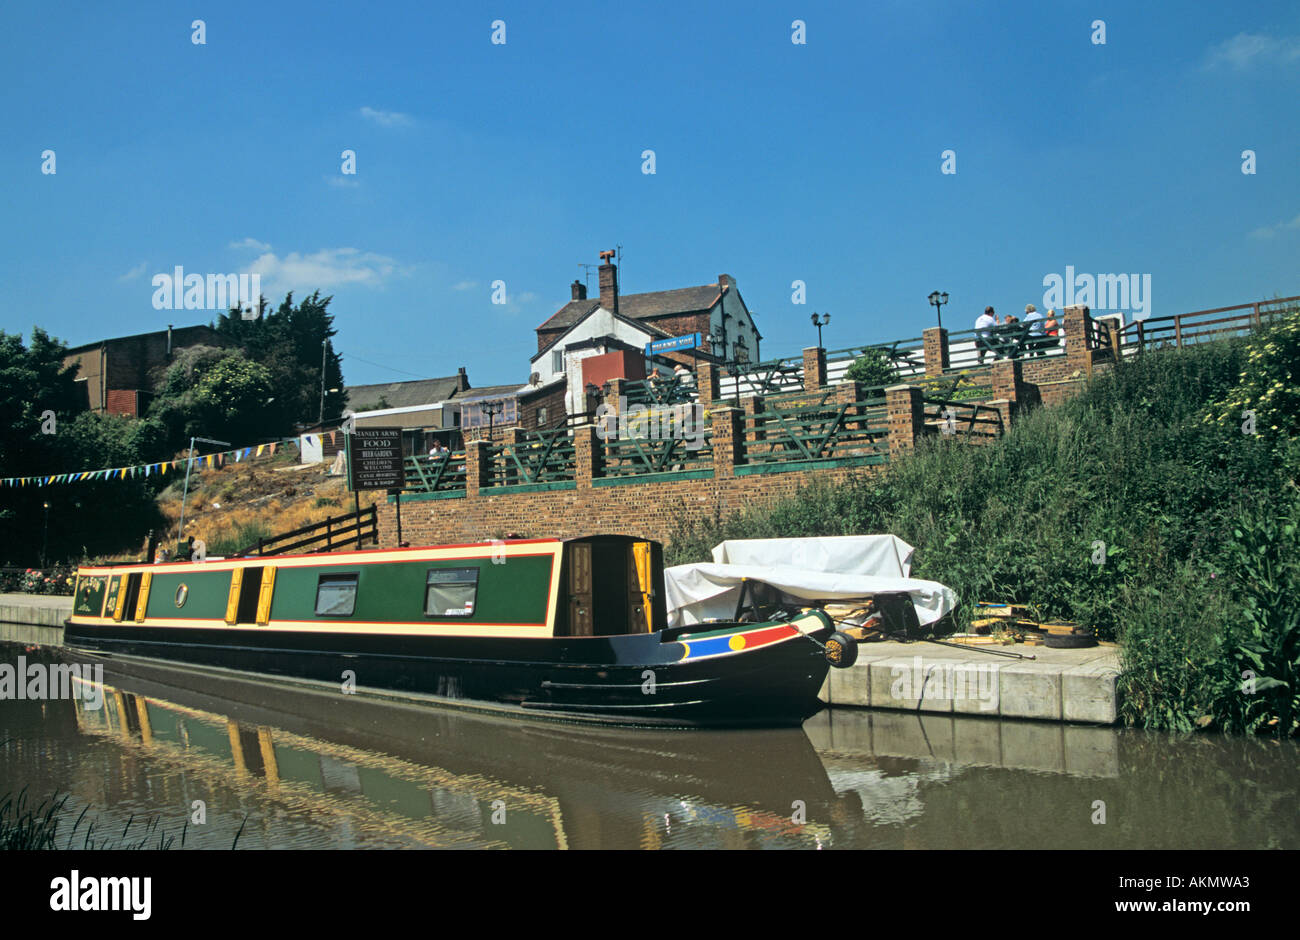 ANDERTON NORTHWICH CHESHIRE England UK Narrow boat moored on the Trent and Mersey Canal with a canal side pub in the background Stock Photo